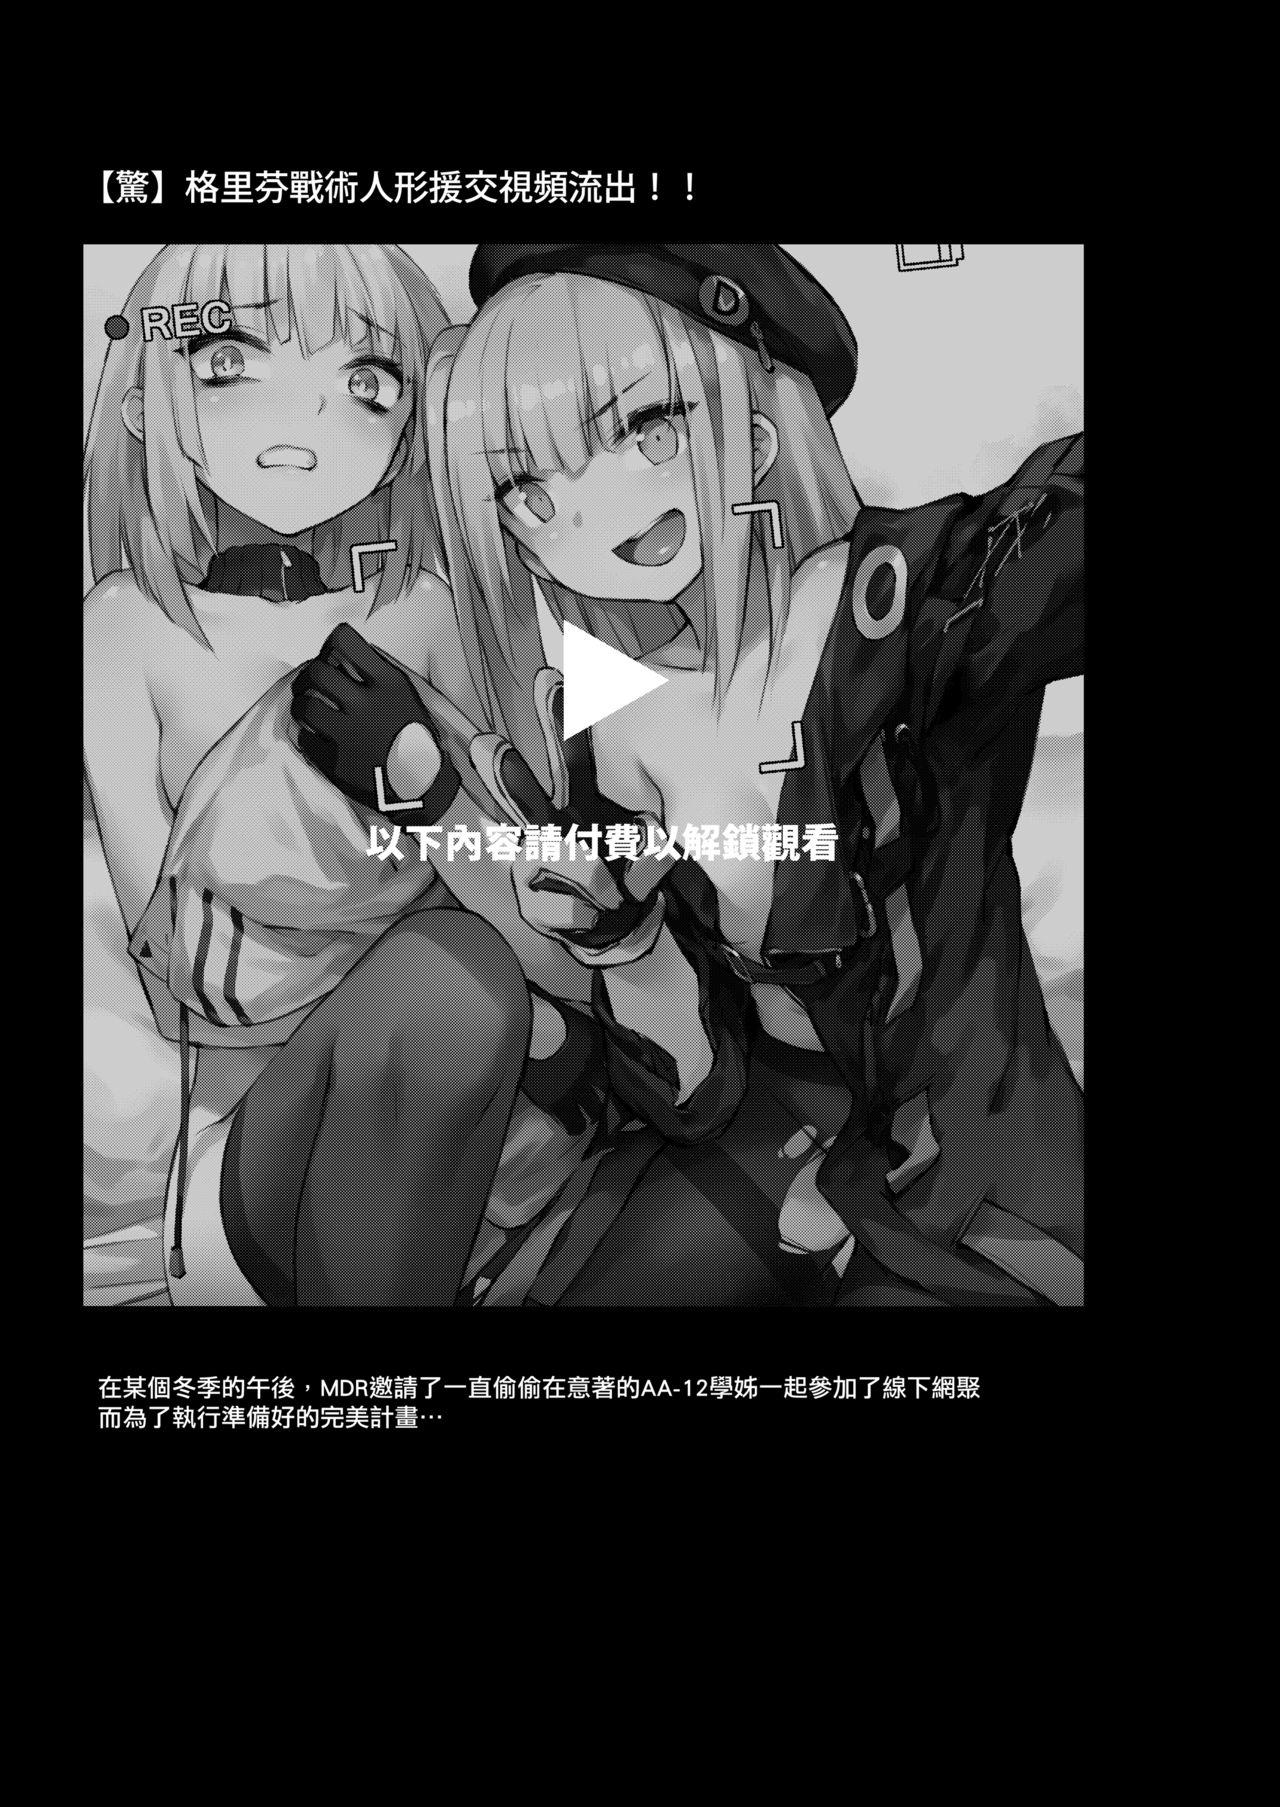 Viet A Video of Griffin T-Dolls Having Sex For Money Just Leaked! - Girls frontline Spy Cam - Page 2